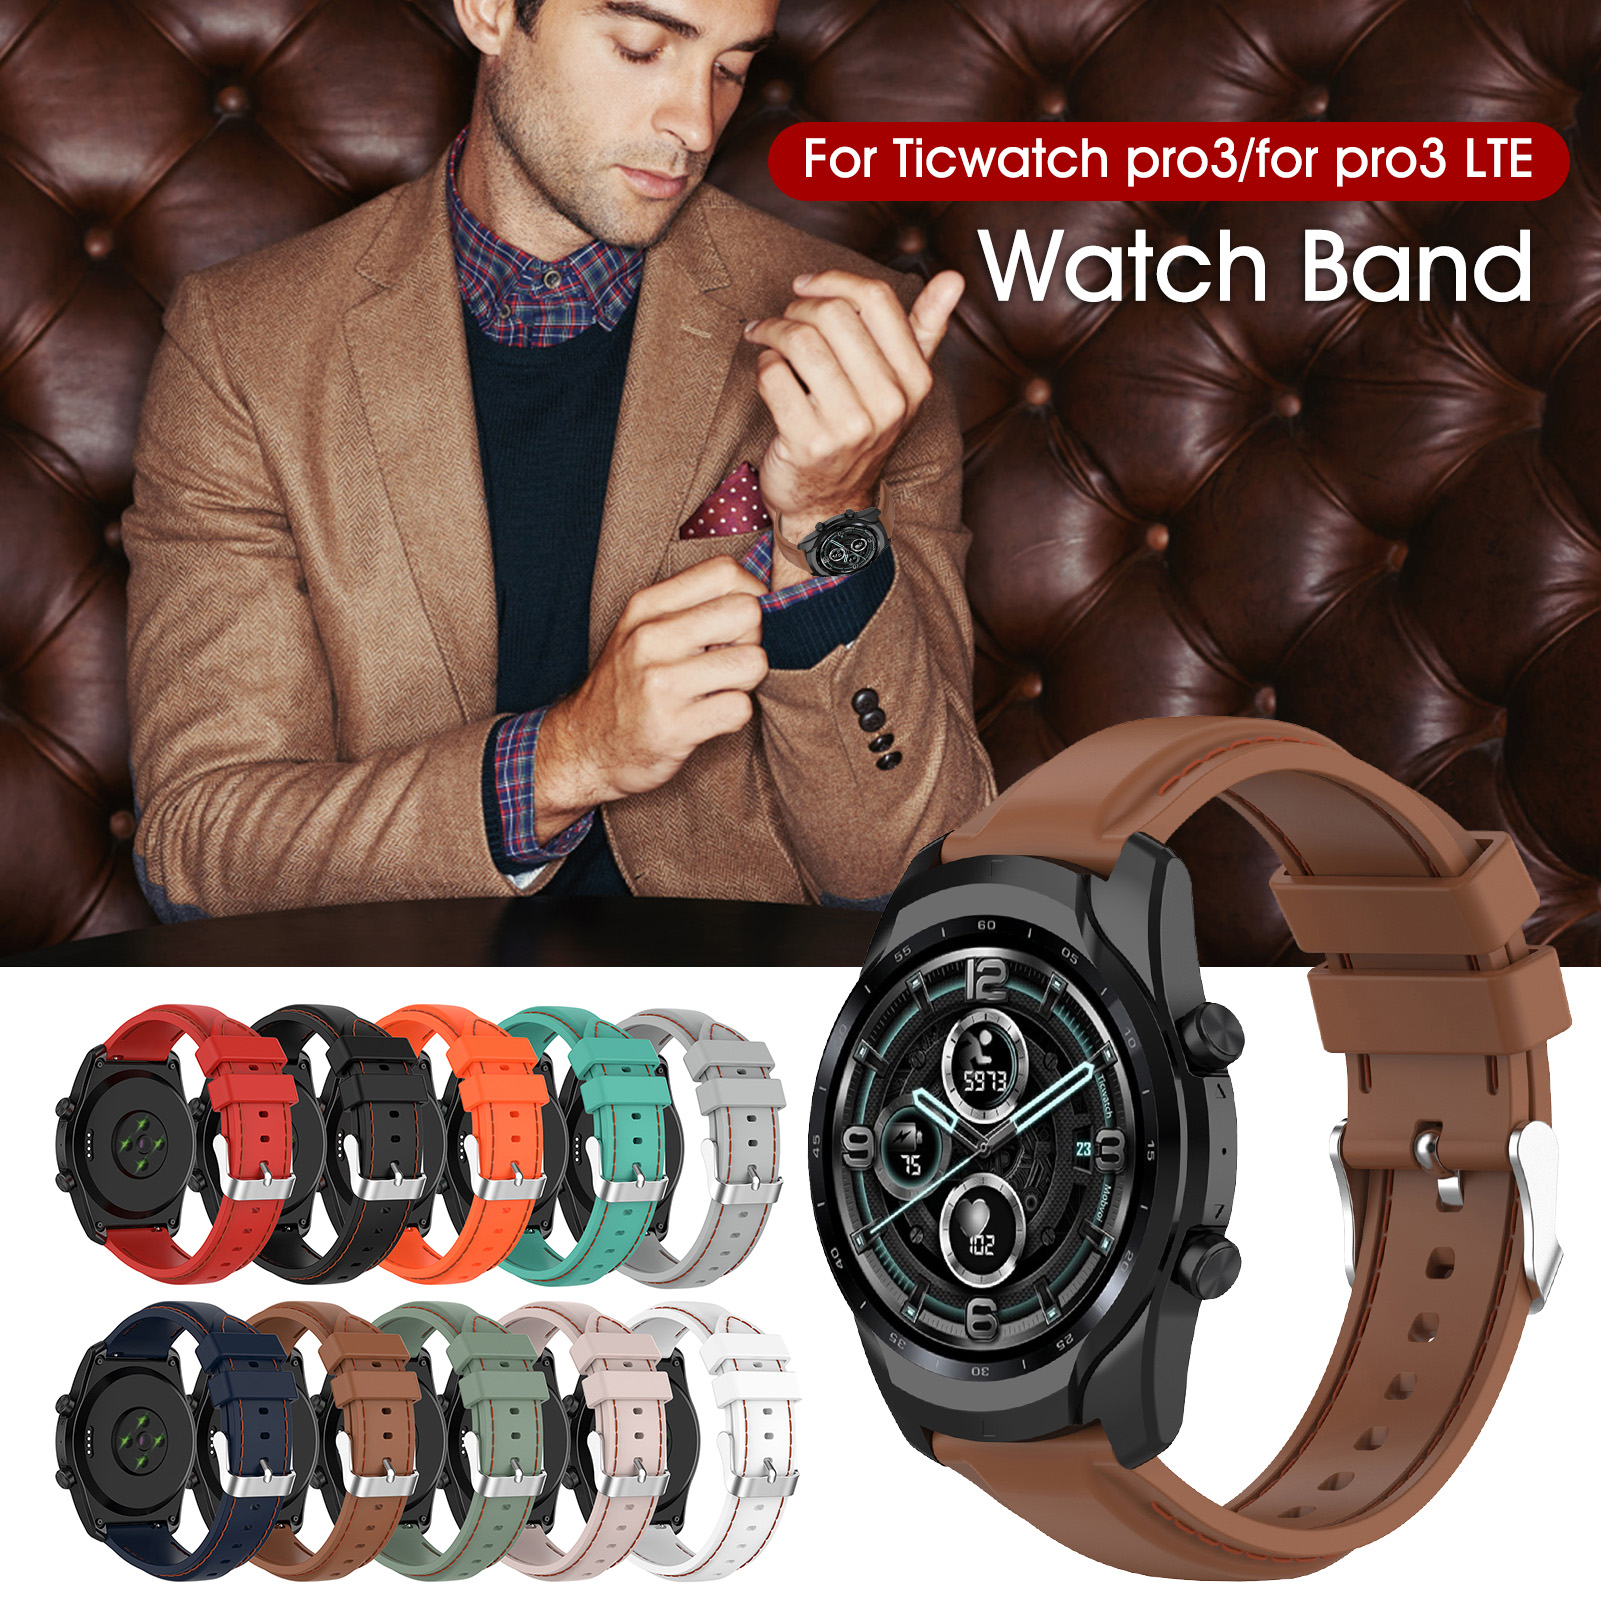 22mm-Soft-Silicone-Watch-Strap-Band-Replacement-Sport-Bracelet-Watchband-For-Ticwatch-Pro3LTE-Haylou-1809083-1